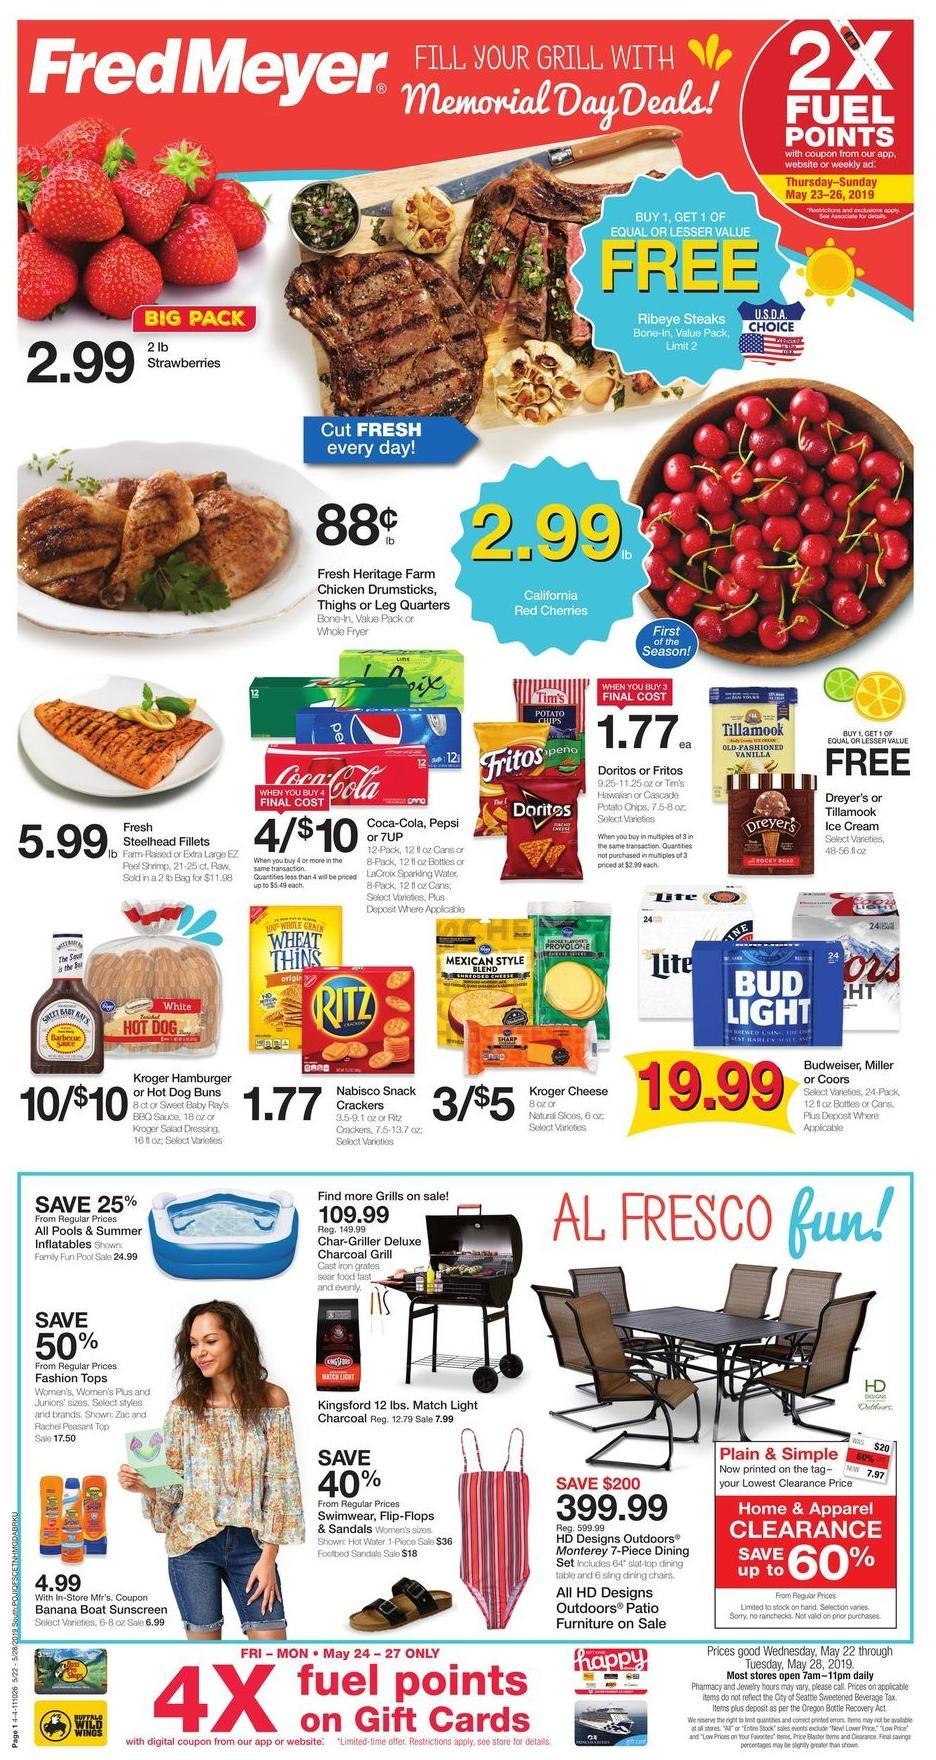 Fred Meyer Weekly Circular Weekly Ad & Specials from May 29